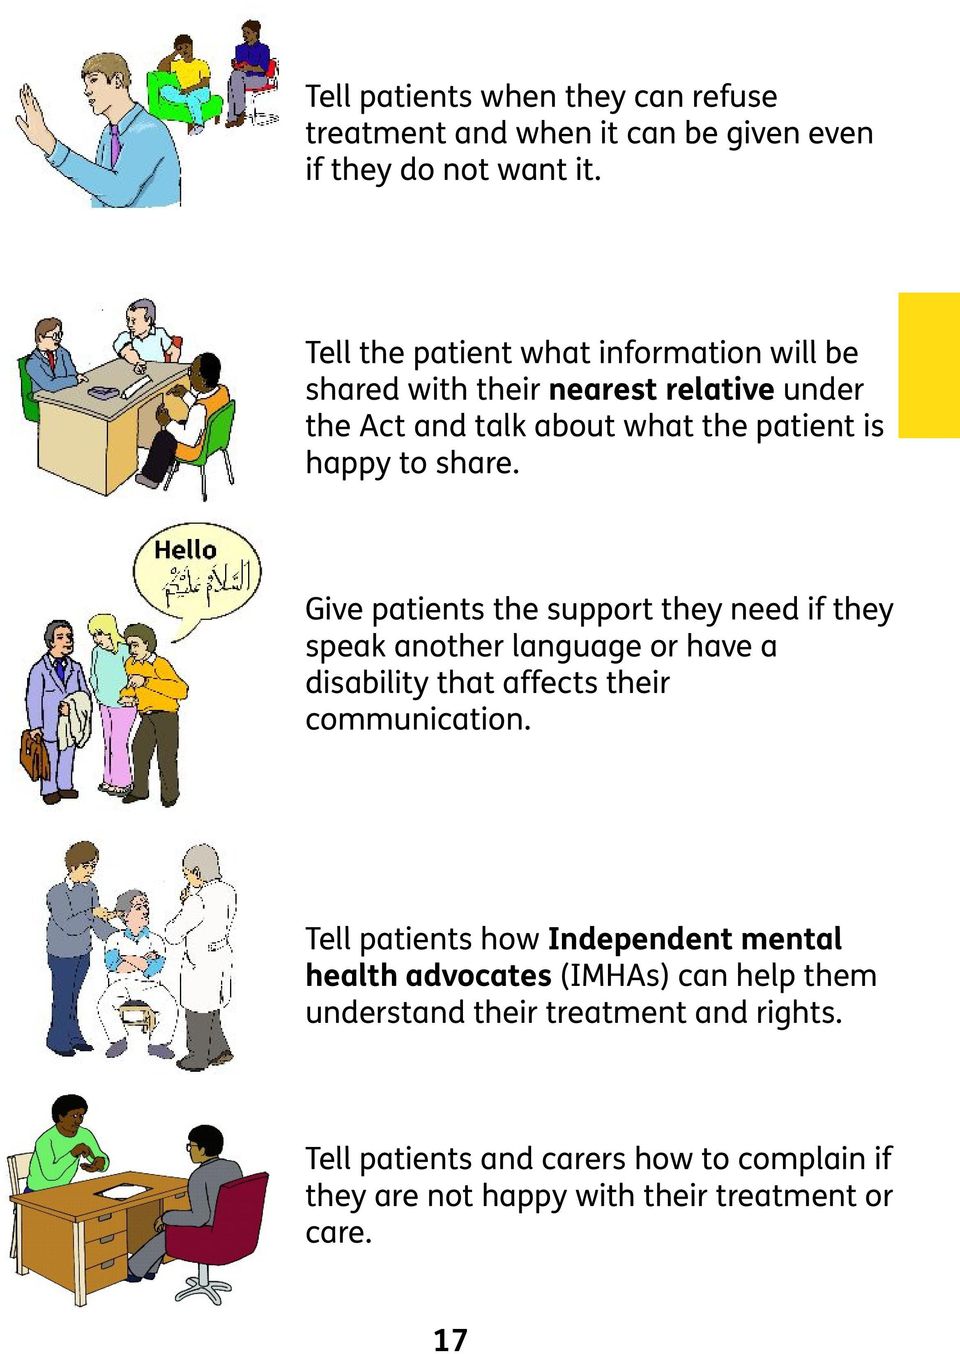 Give patients the support they need if they speak another language or have a disability that affects their communication.